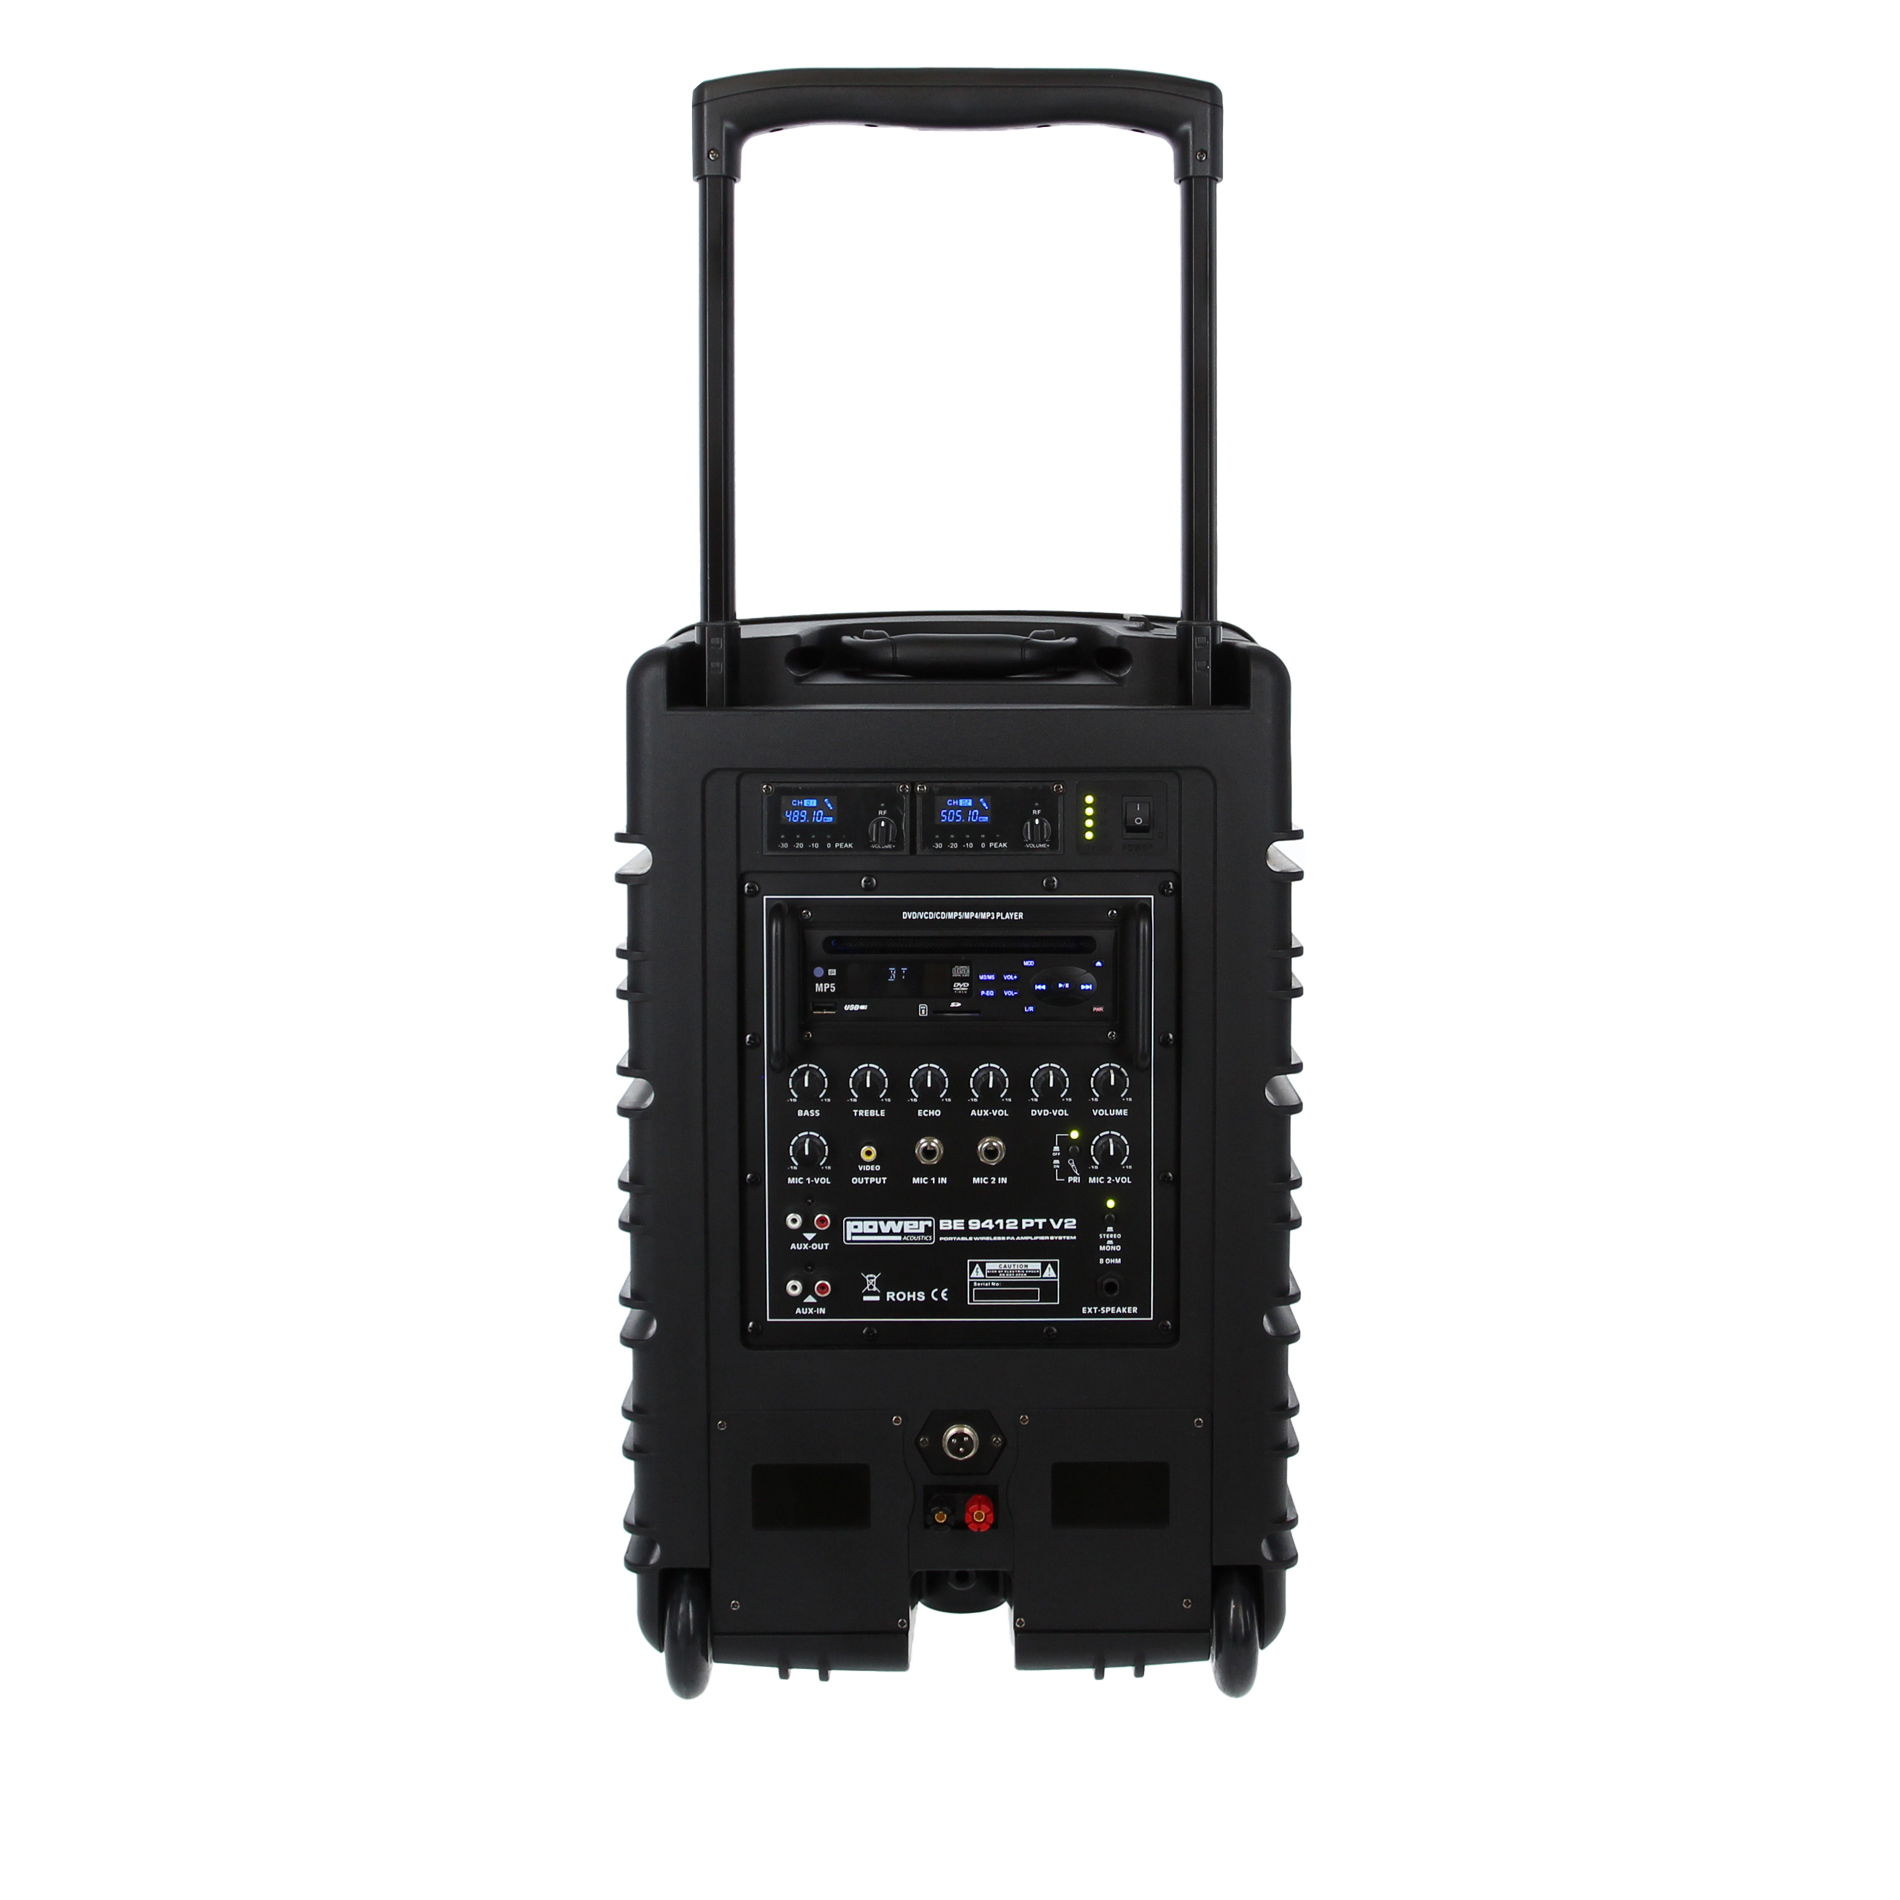 Power Acoustics Be 9412 V2 - Mobile PA-Systeme - Variation 4